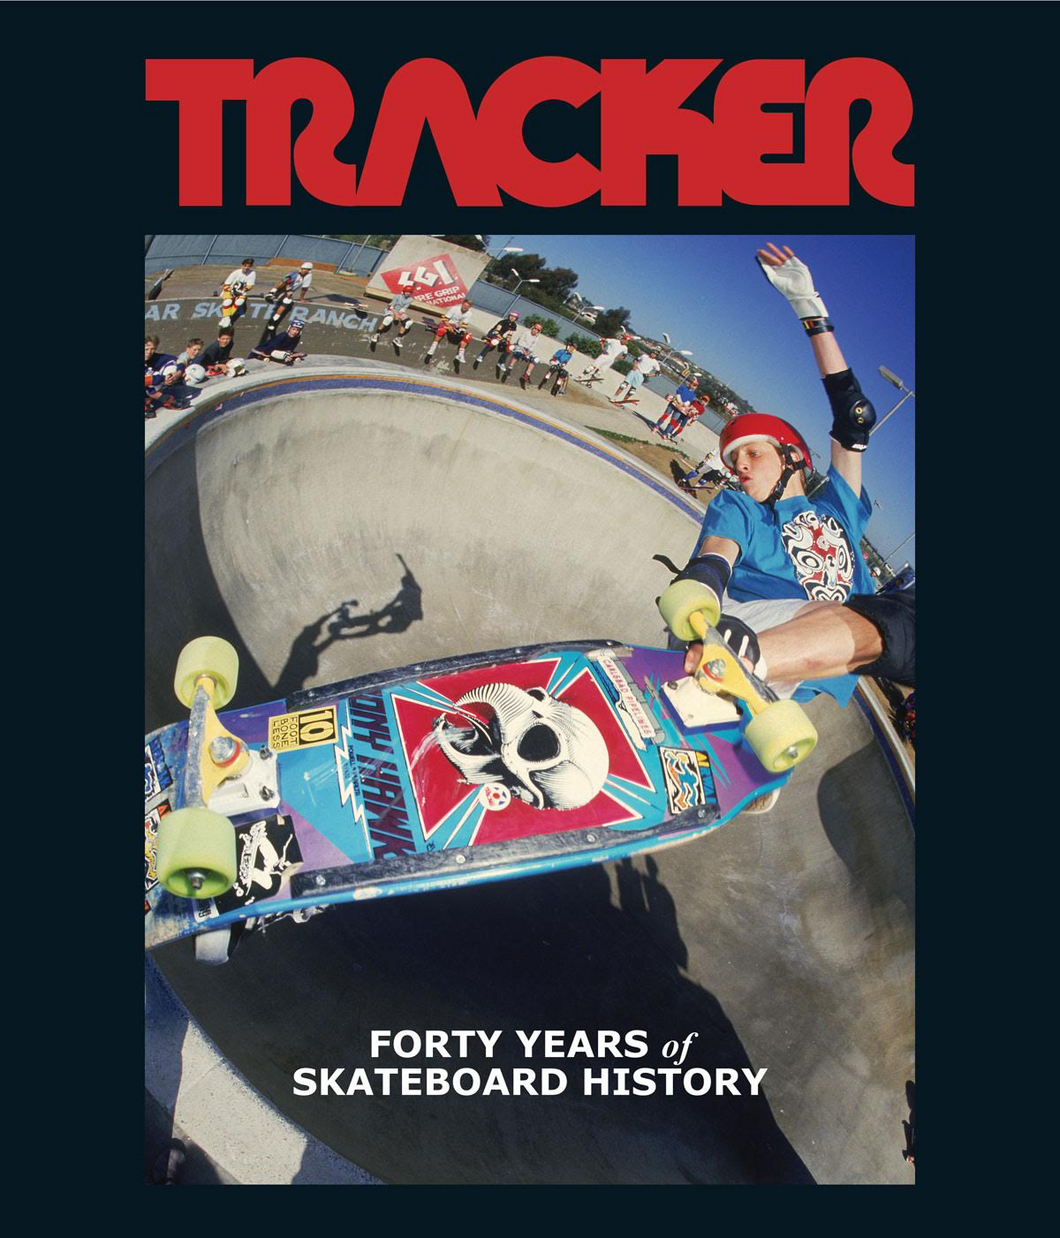 TRACKER HARDBACK BOOK – Forty Years of Skateboard History - AUTOGRAPHED